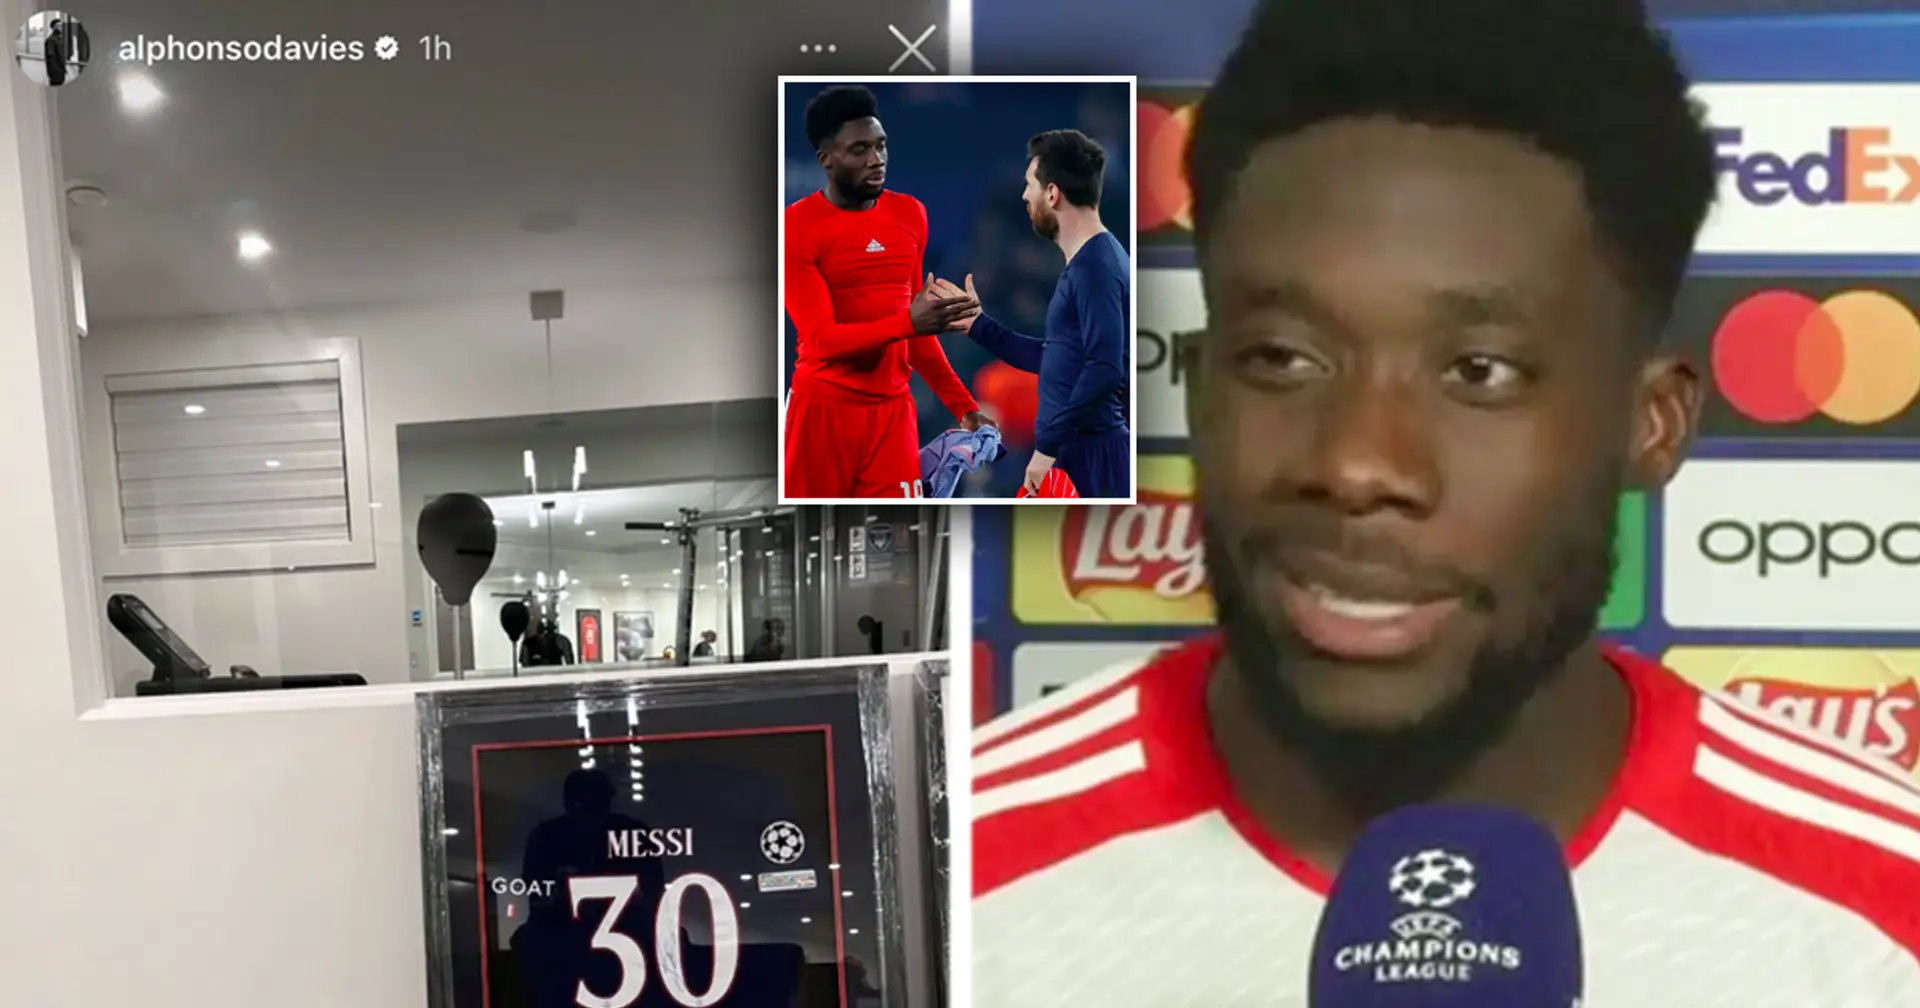 Alphonso Davies shows off framed Messi jersey – it took ages for him to finally get it